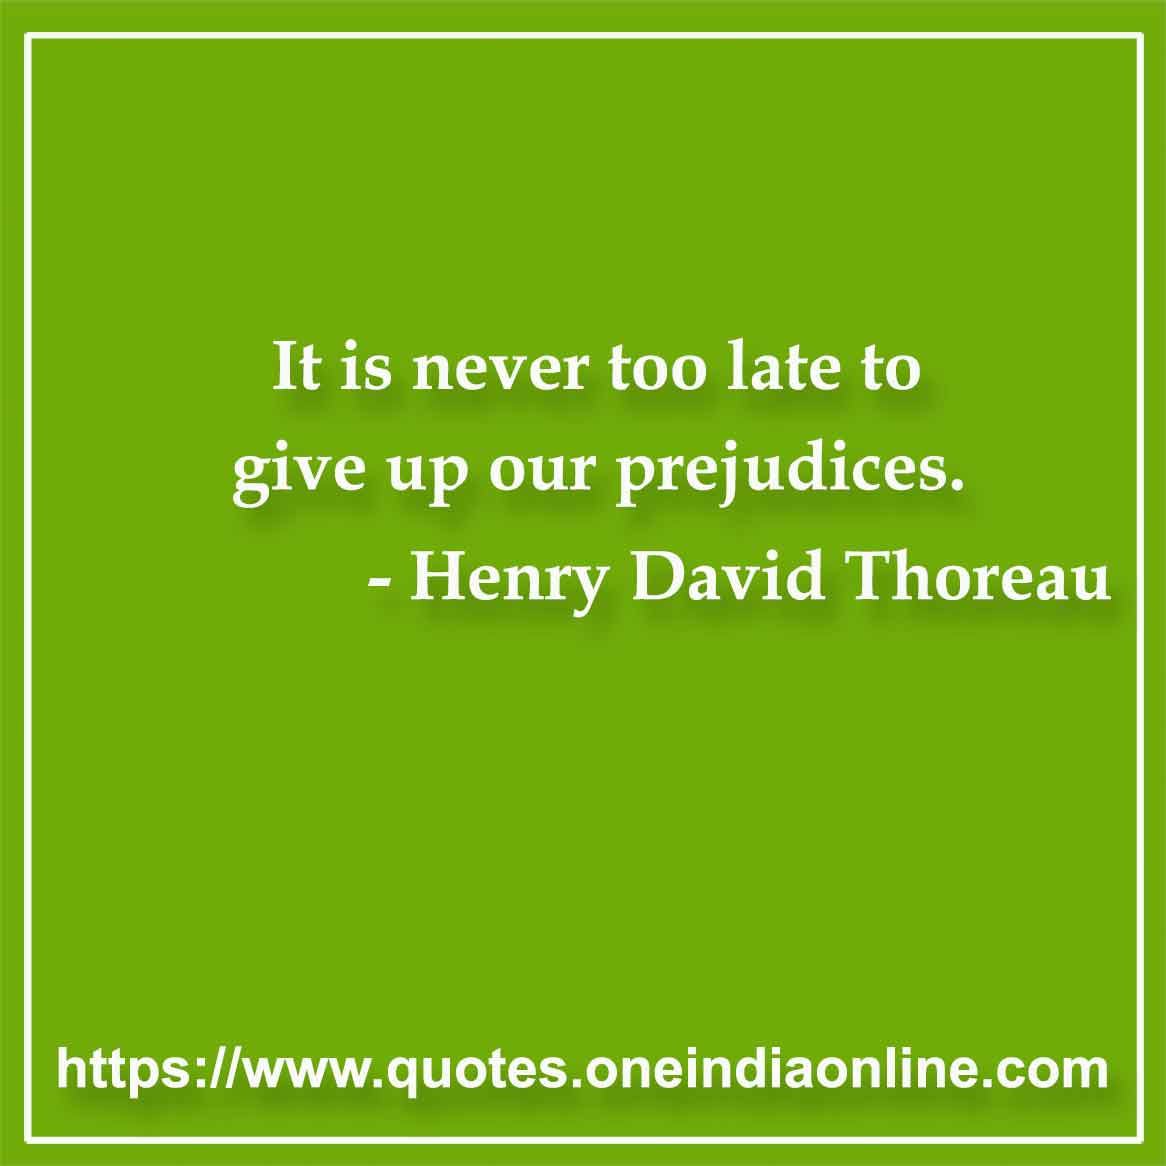 It is never too late to give up our prejudices.

- Henry David Thoreau Quotes